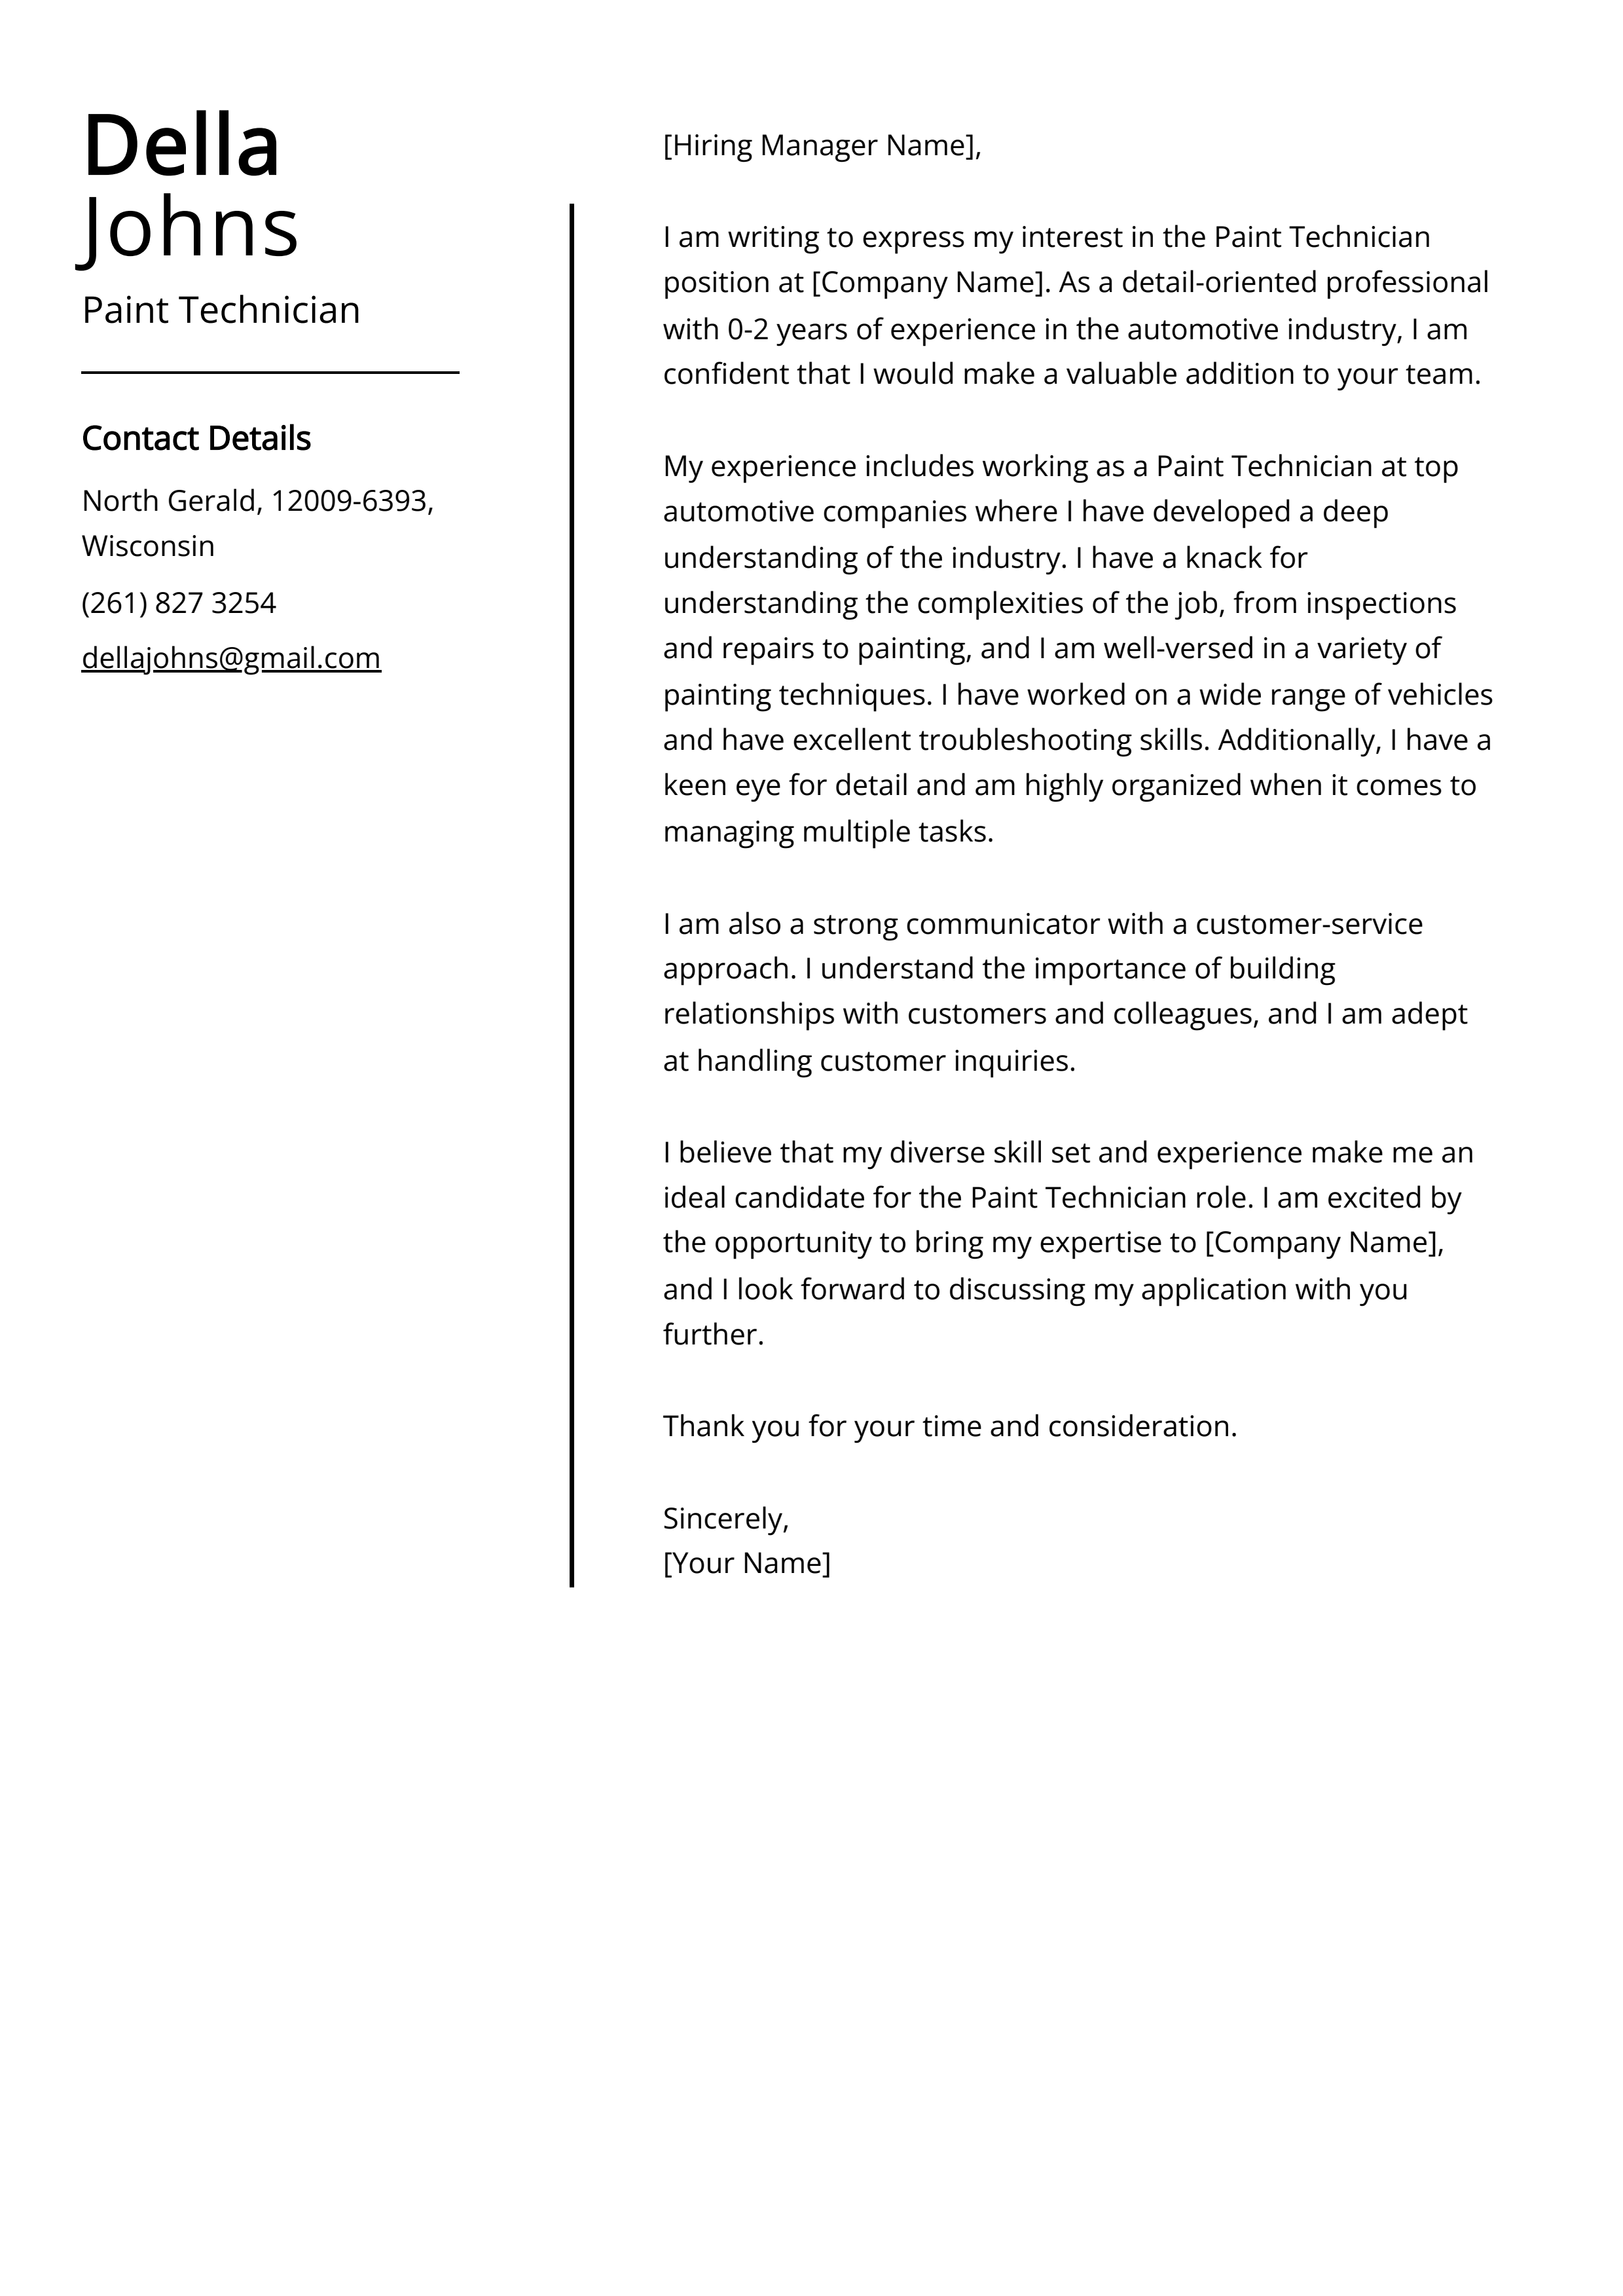 Paint Technician Cover Letter Example